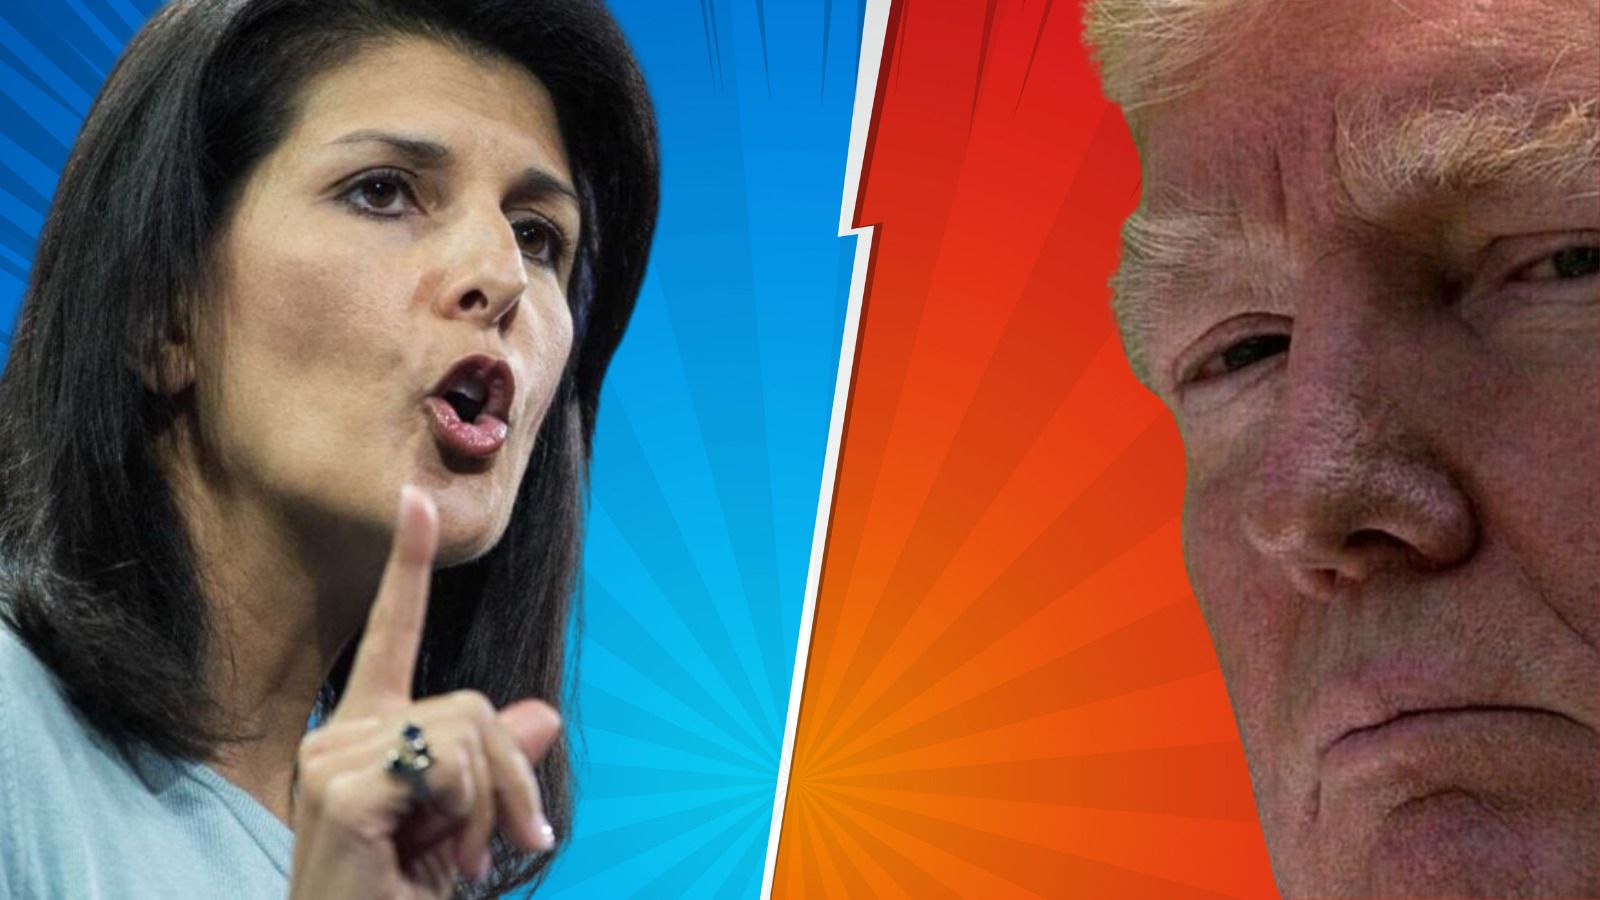 UPDATE: Nikki Haley’s Brother Appears To Confirm Haley Will Mount Coup At Republican National Convention: “It’s Happening!”